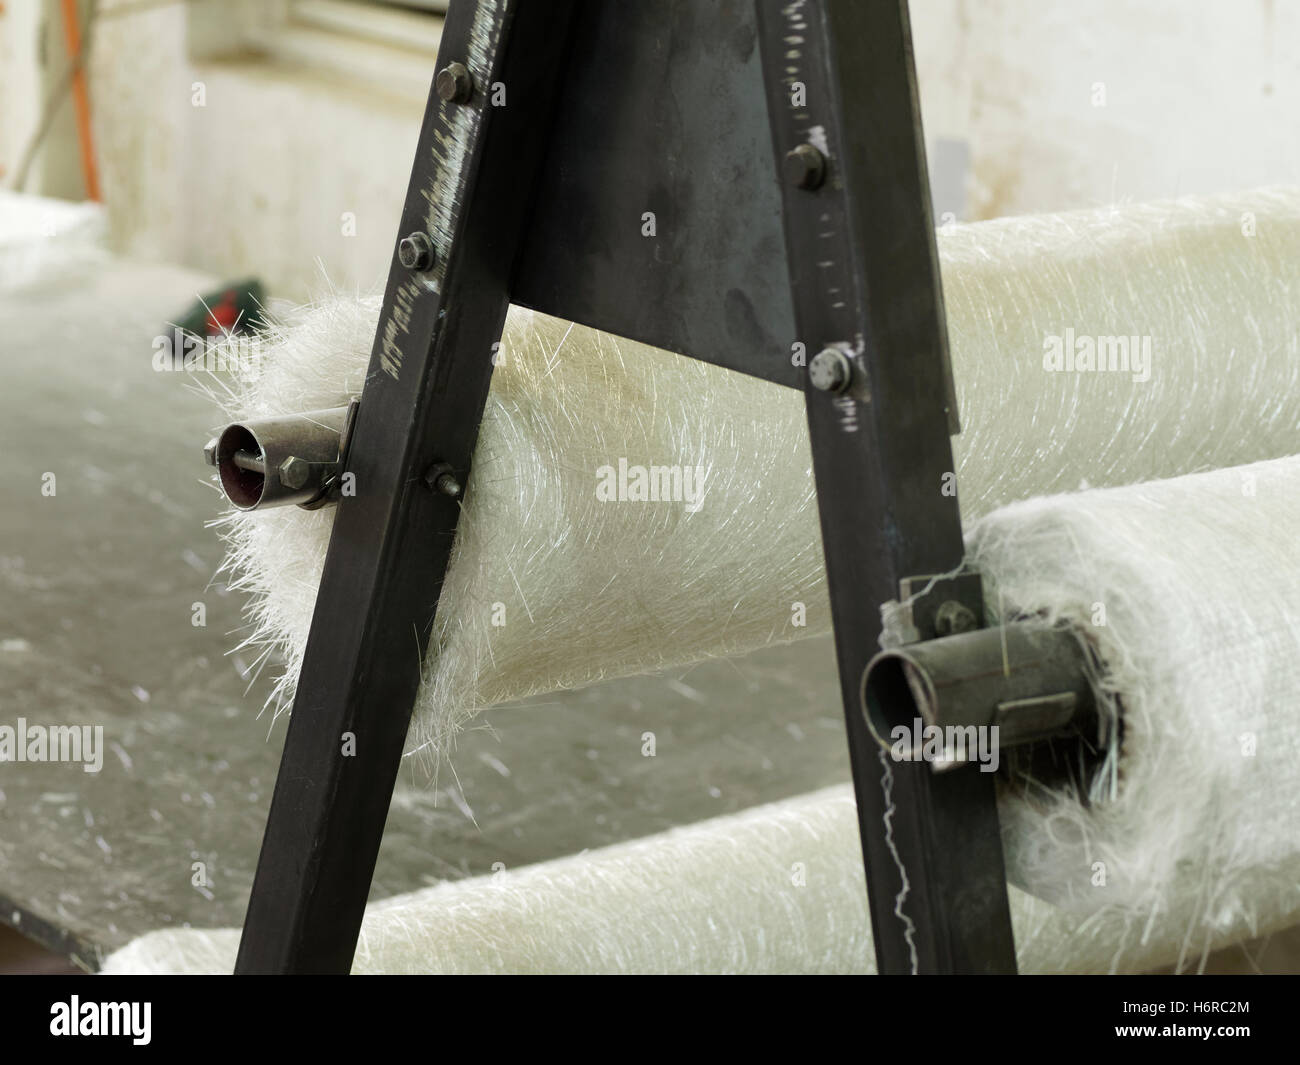 Fiberglass in boat production; details and processing Stock Photo